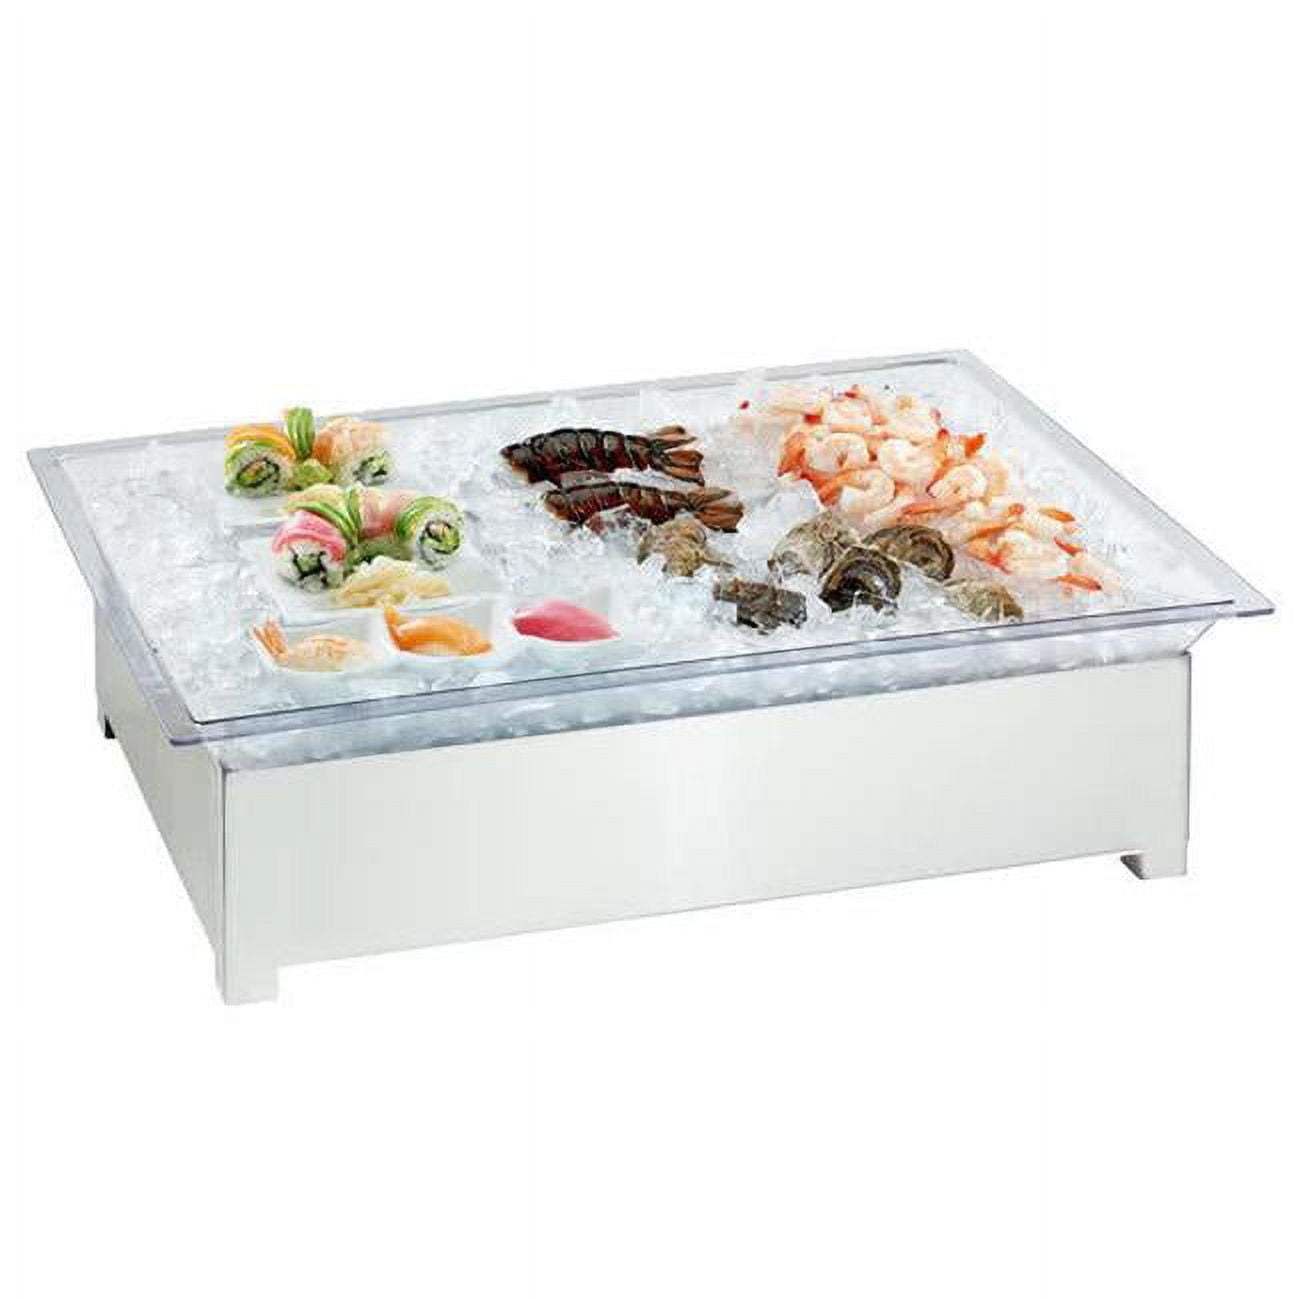 Cal Mil 3033-55 19 x 27 in. Ice Display - Stainless Steel - Silver